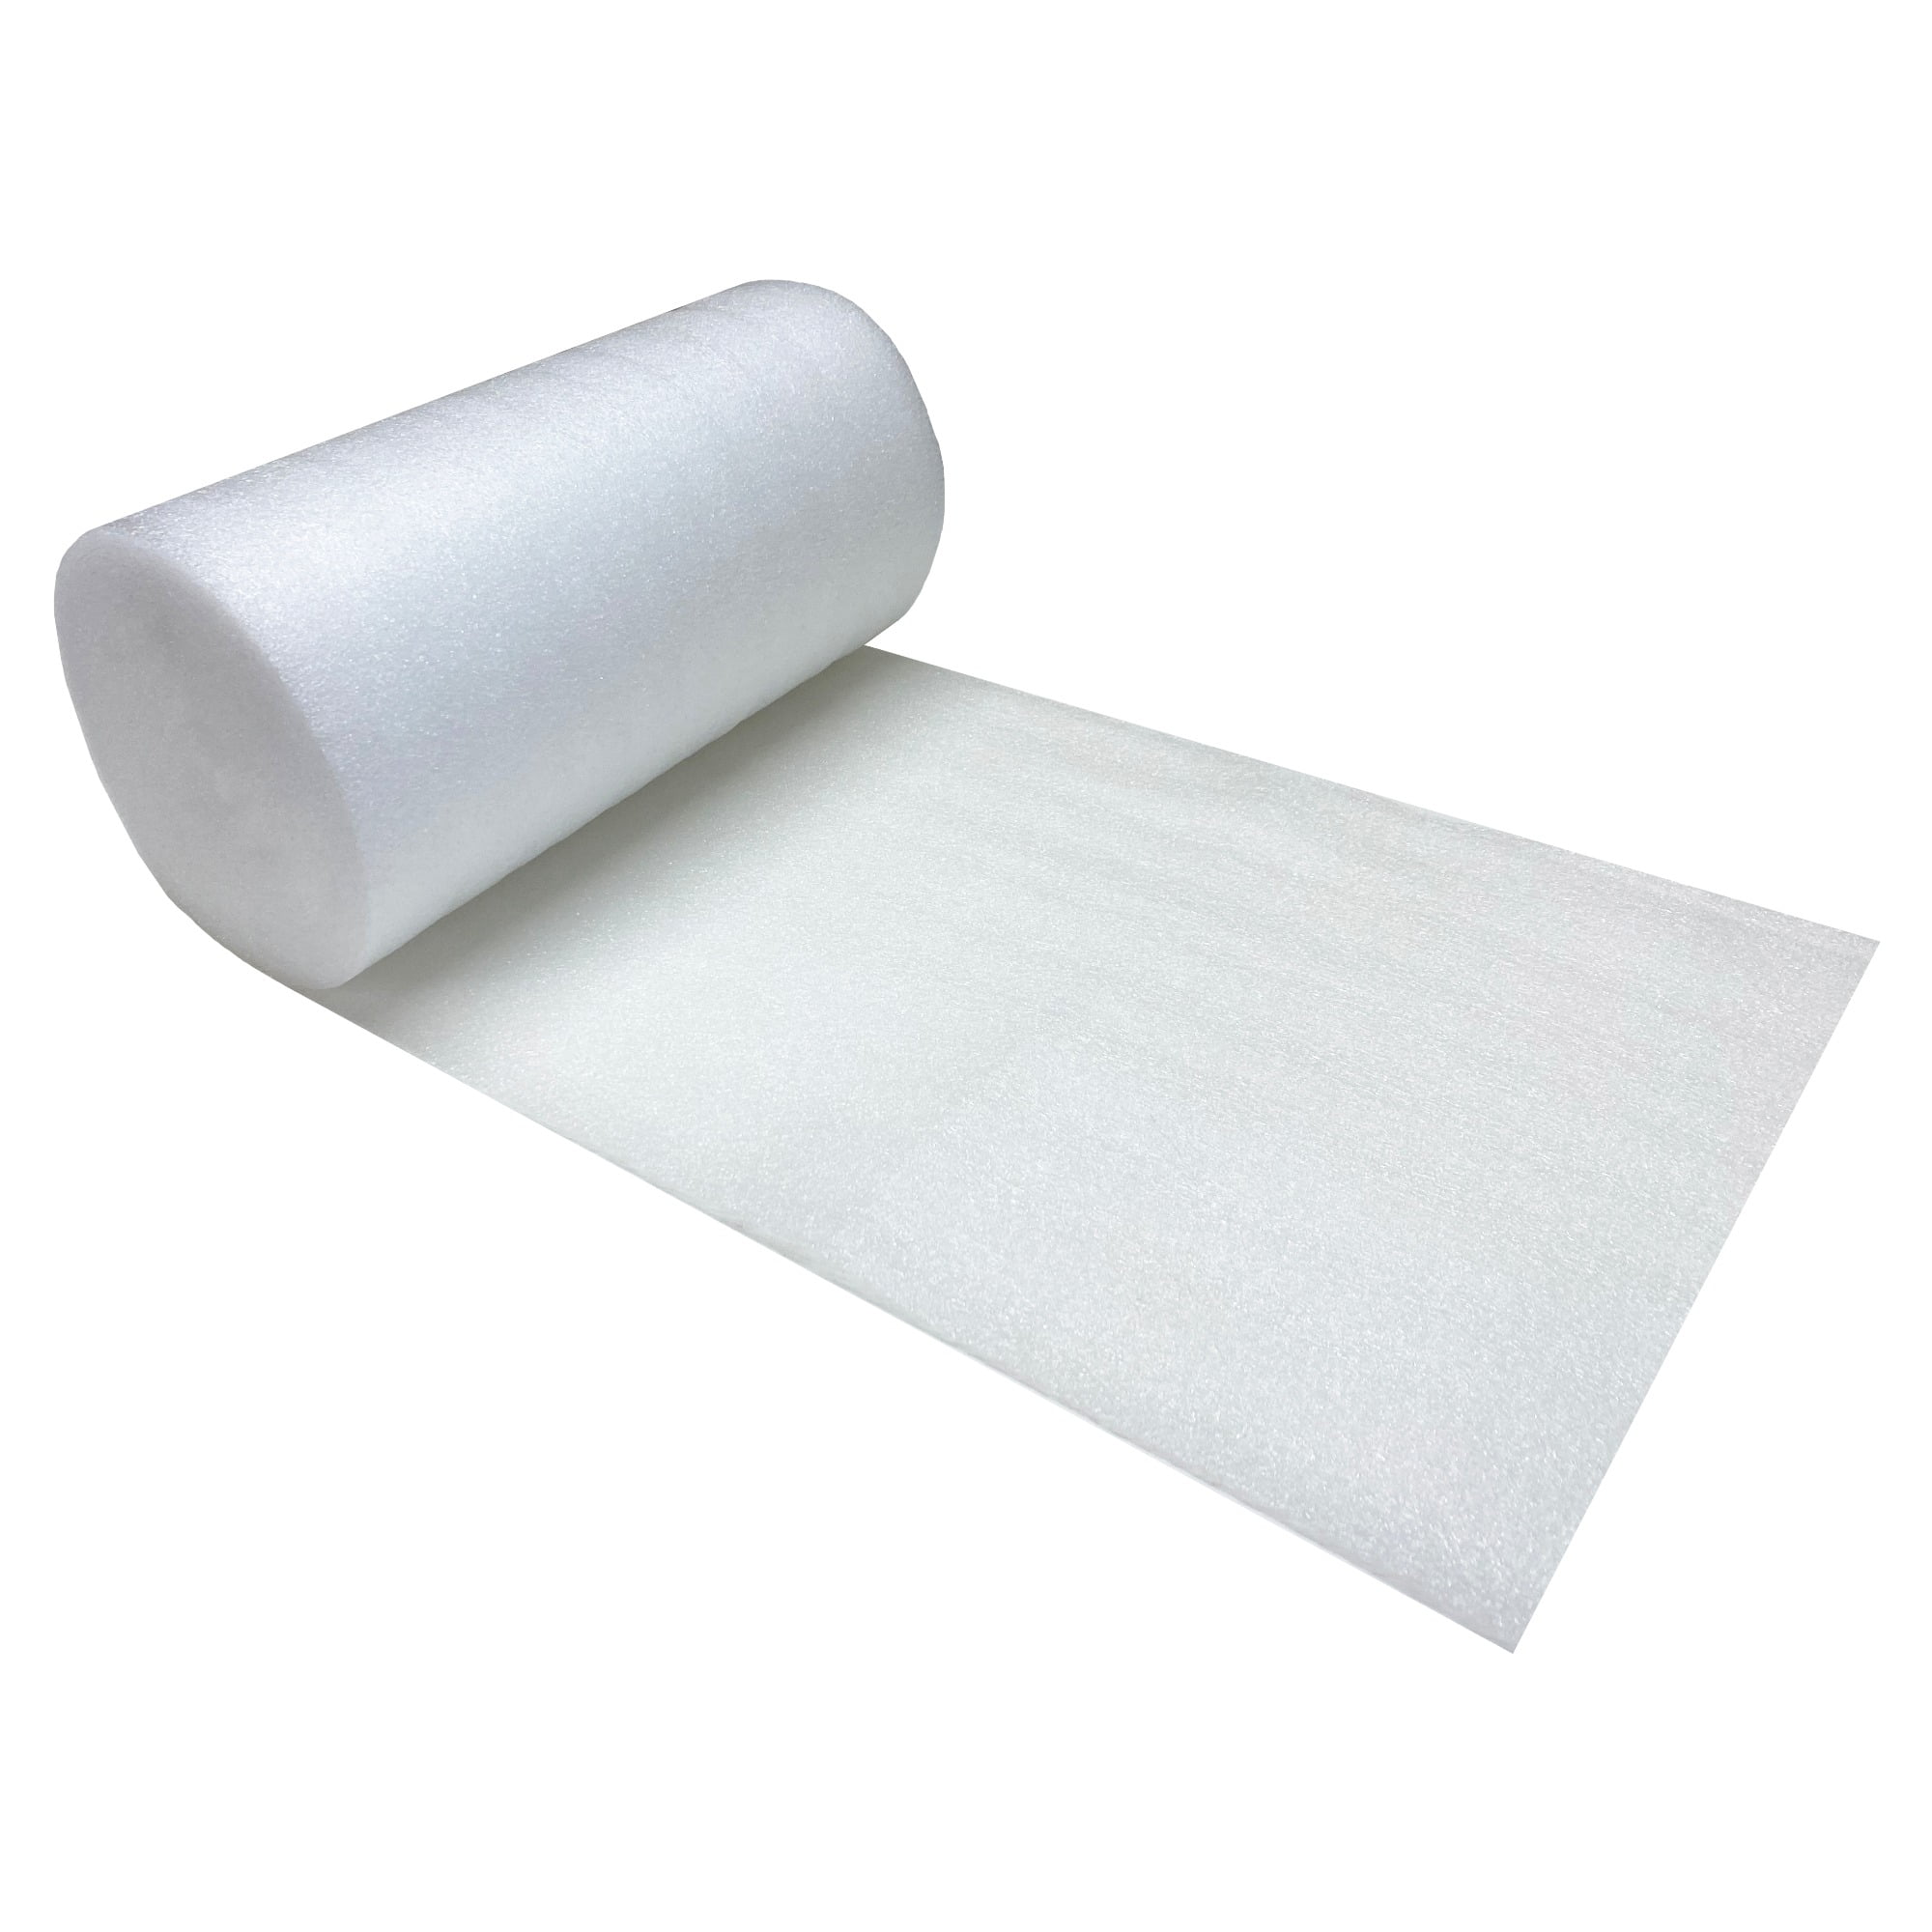  40 Foam Cushioning Sheets, 12 x 15, Tearable Roll, Moving  Supplies for Packing, Storage and Shipping : Office Products